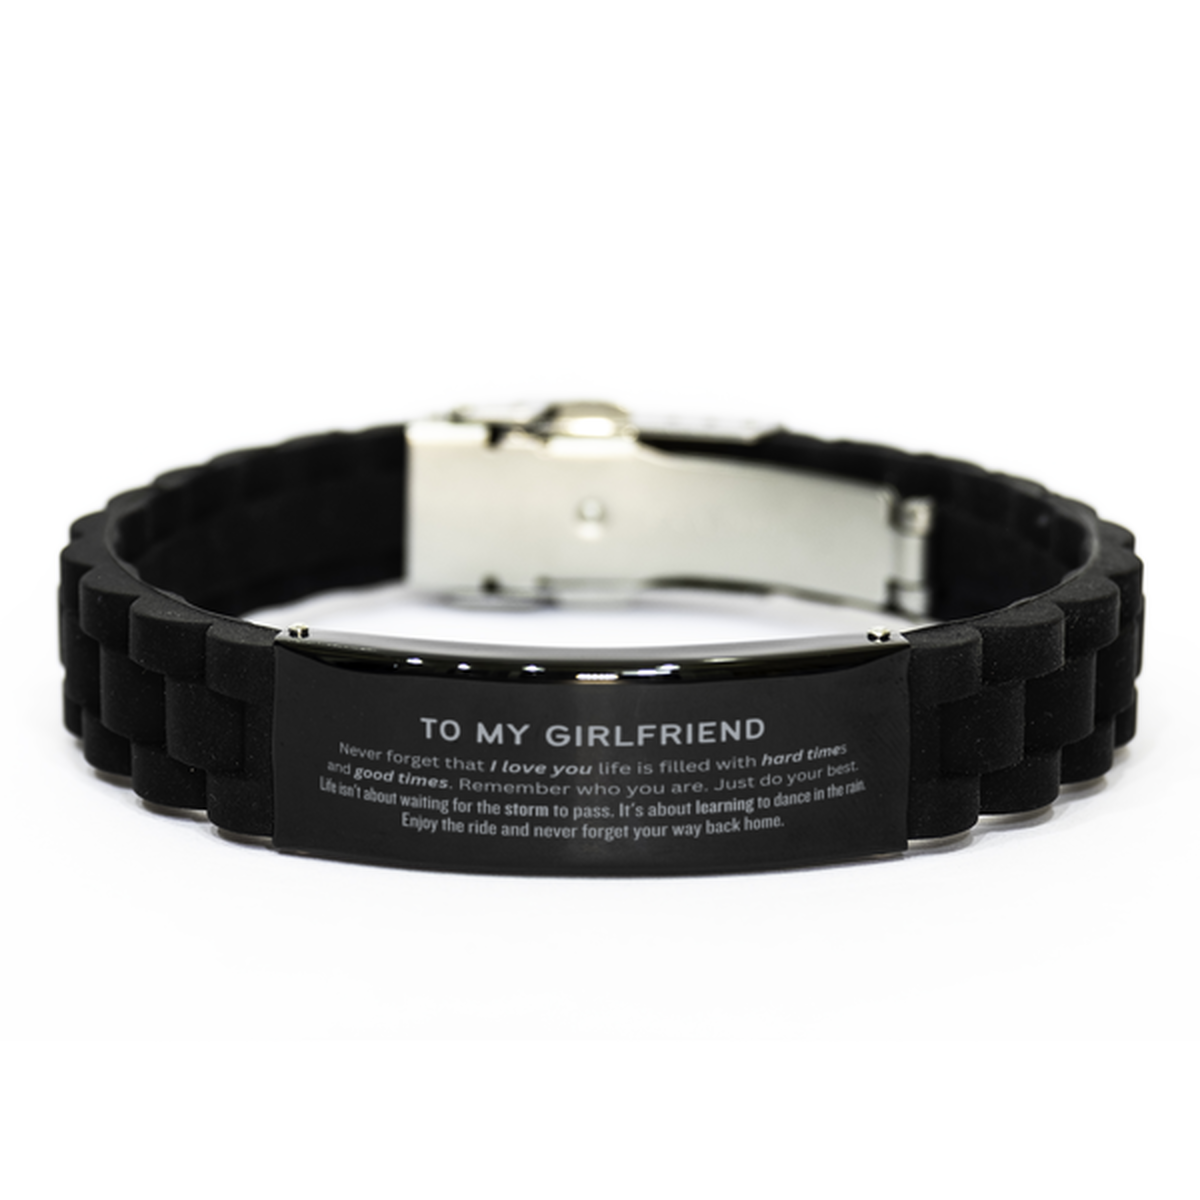 Christmas Girlfriend Black Glidelock Clasp Bracelet Gifts, To My Girlfriend Birthday Thank You Gifts For Girlfriend, Graduation Unique Gifts For Girlfriend To My Girlfriend Never forget that I love you life is filled with hard times and good times. Rememb